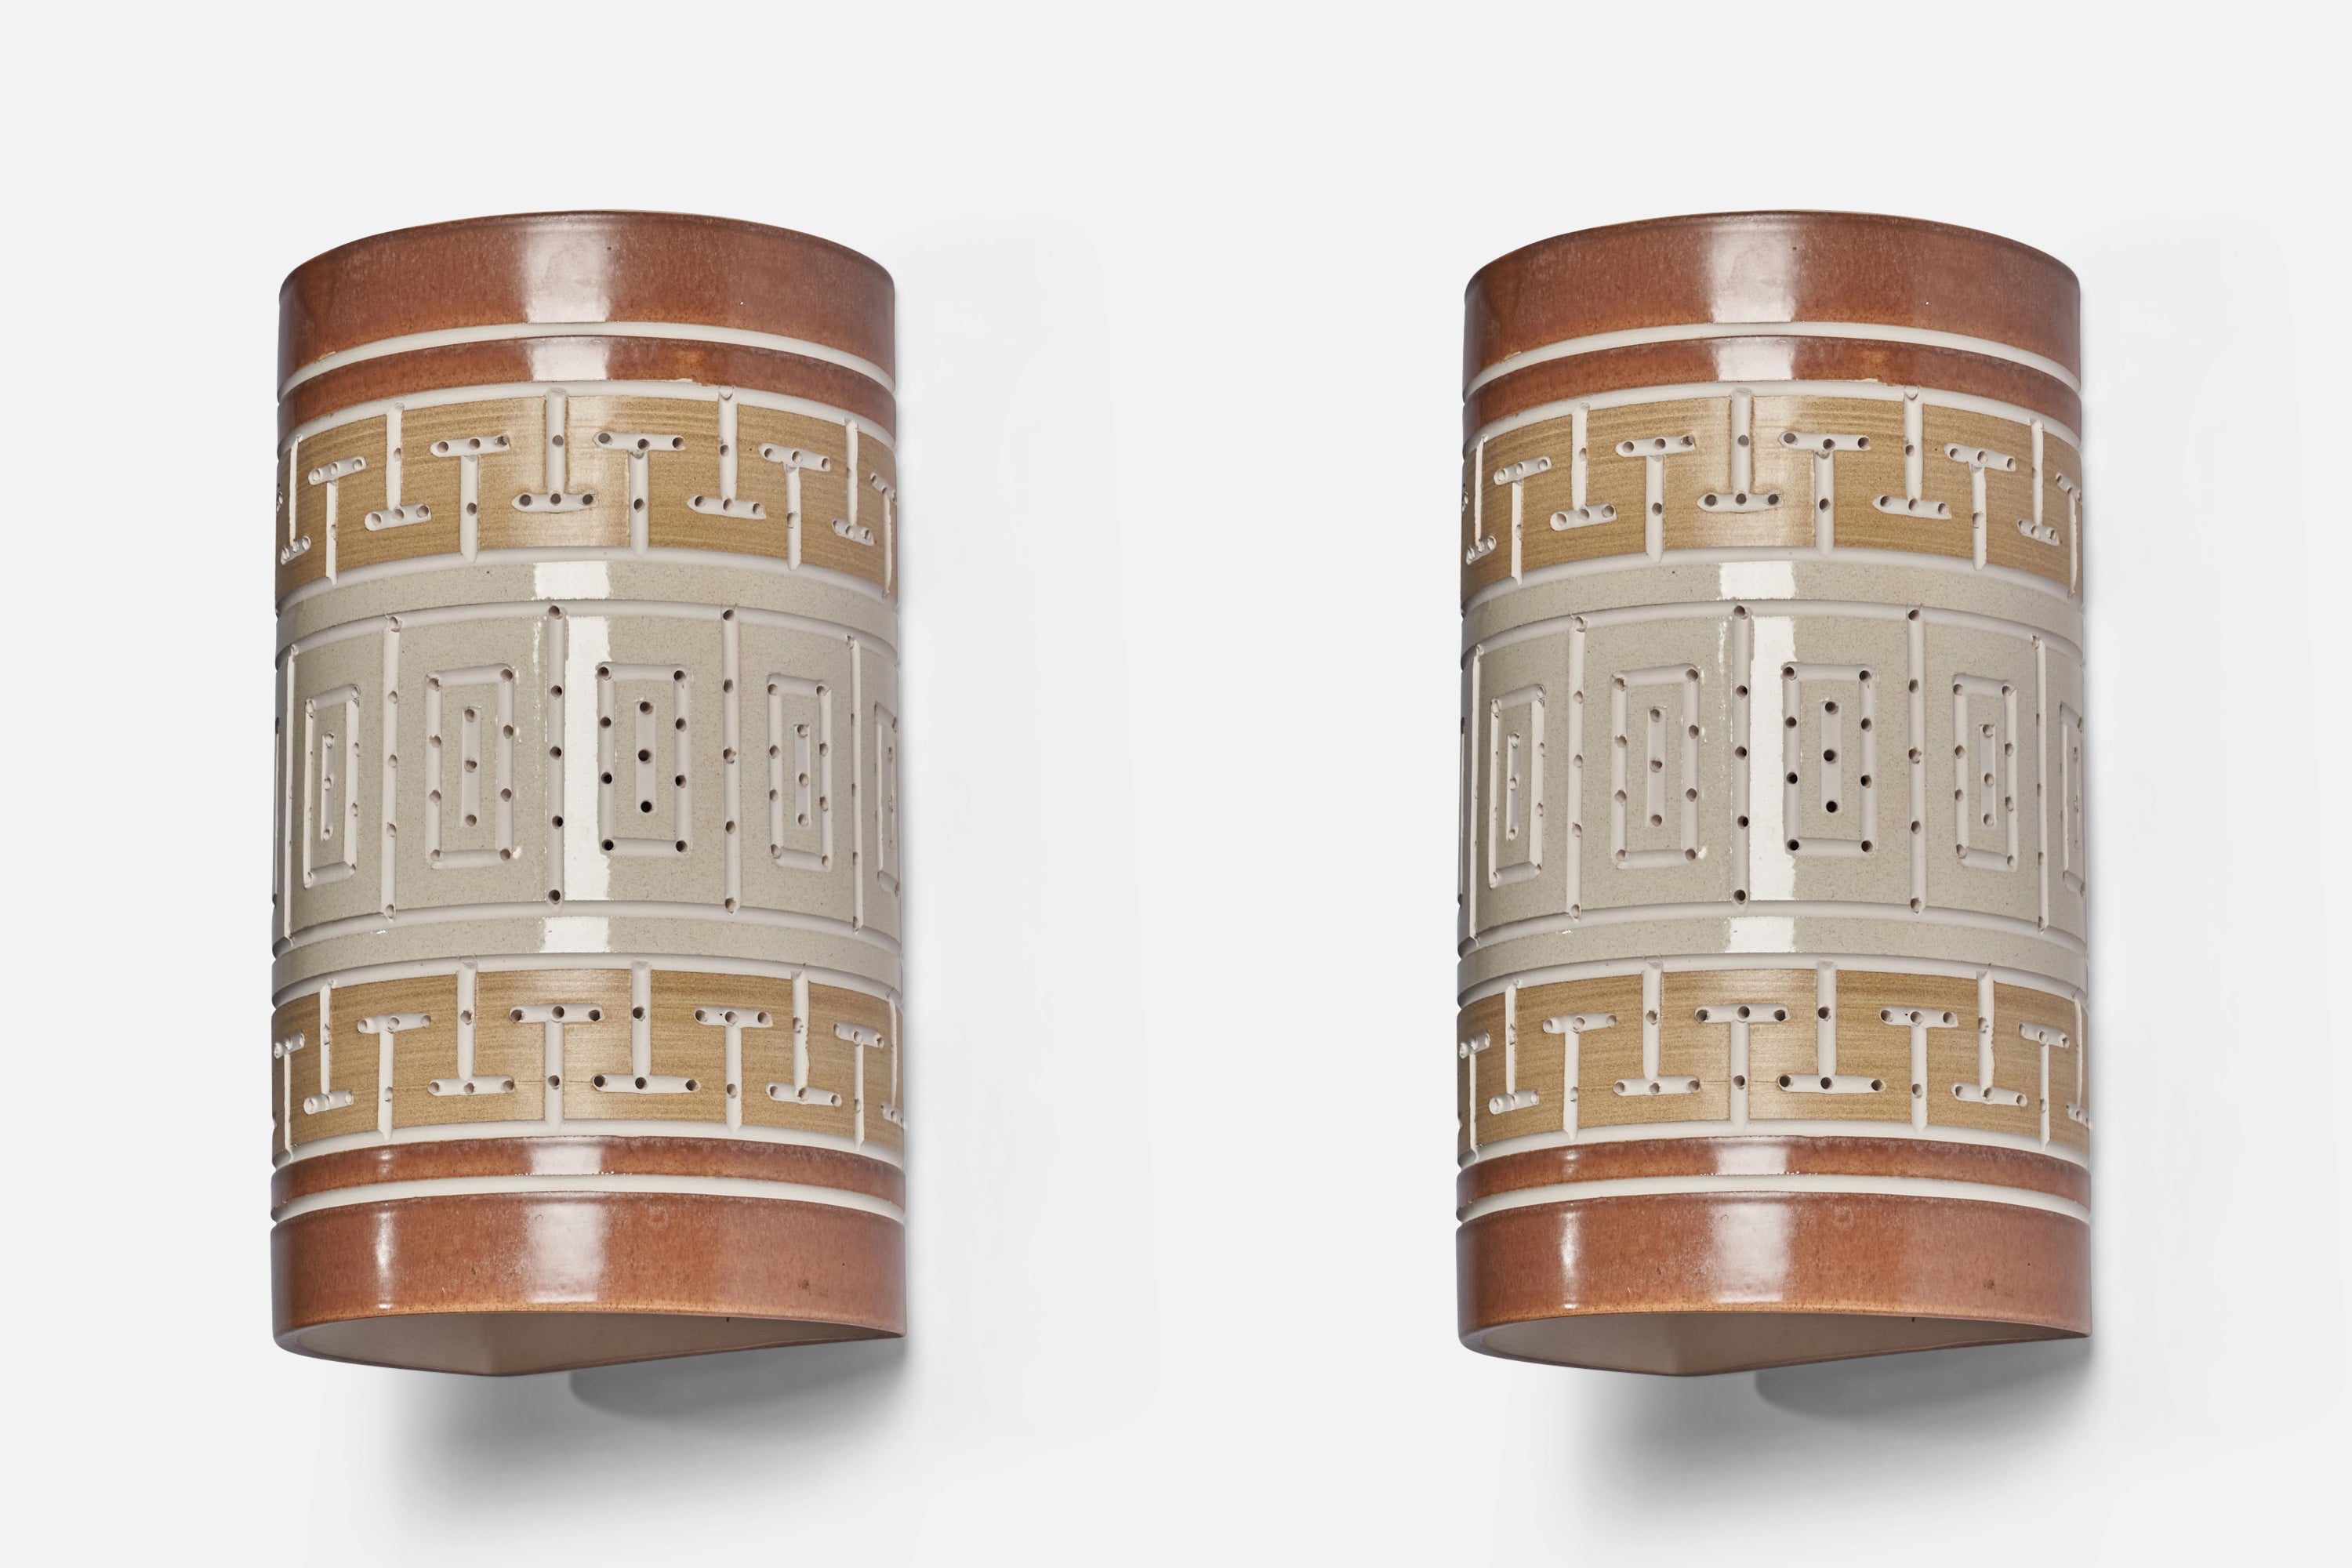 A pair of hand-painted brown, beige and grey ceramic wall lights designed and produced by Martha and Beaumont Mood, San Antonio, Texas, USA, 1970s.

Overall Dimensions (inches): 12.4